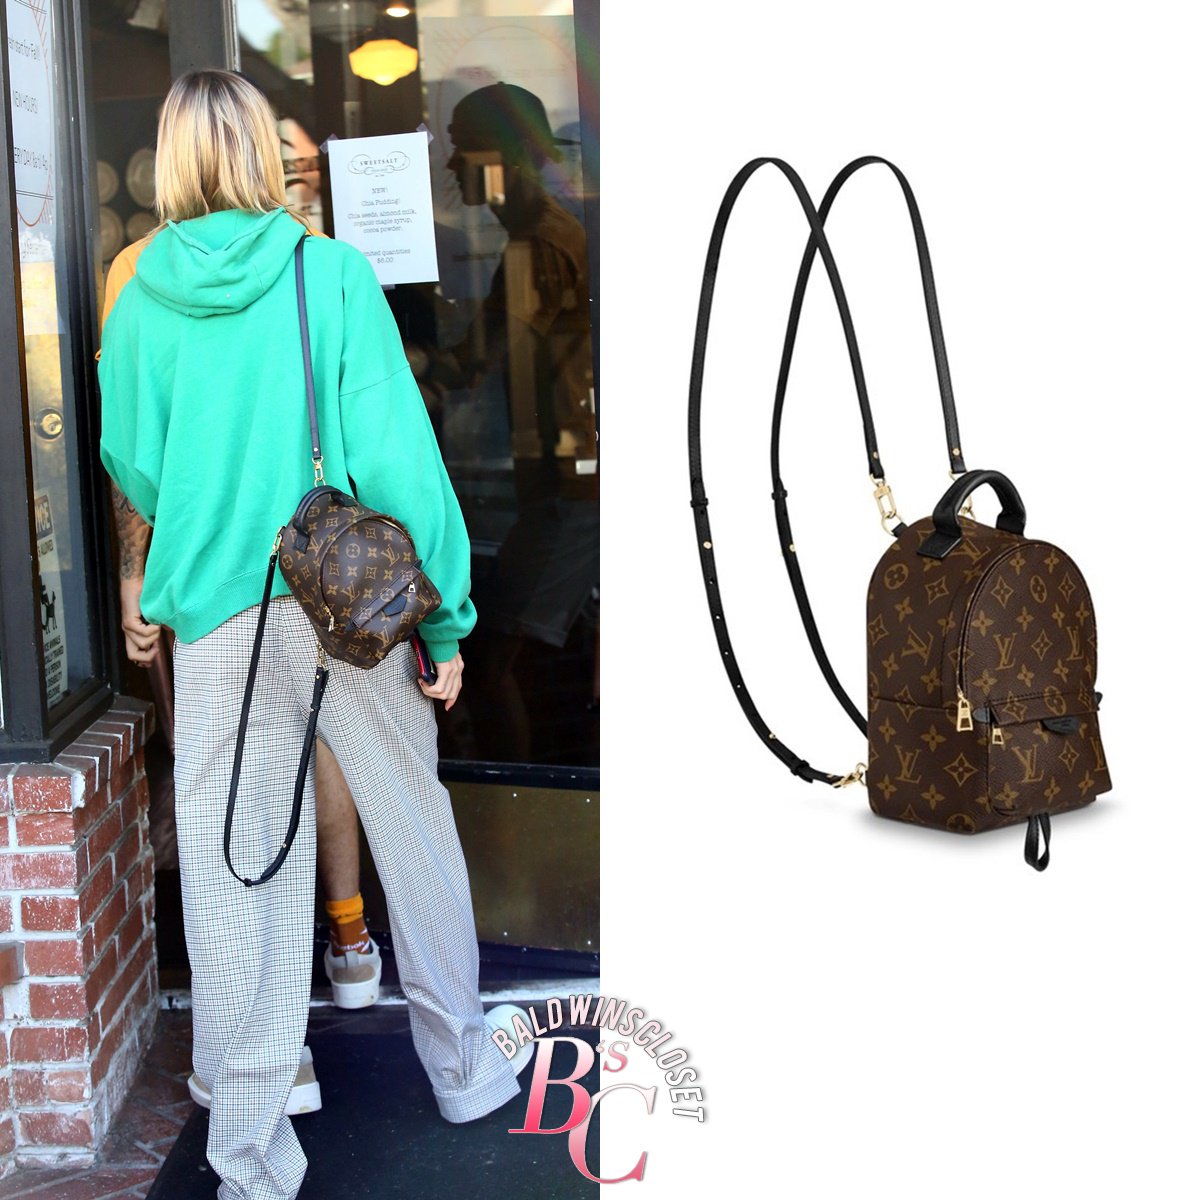 Hailey Bieber's Closet on X: October 23, 2018 - #HaileyBaldwin wore a  Vintage #Chanel Logo Sweatshirt for ￥298,000, #AcneStudios Velcro Sneakers  for $380.00, #LouisVuitton Palm Springs Backpack for $1,940.00. And a  personalised